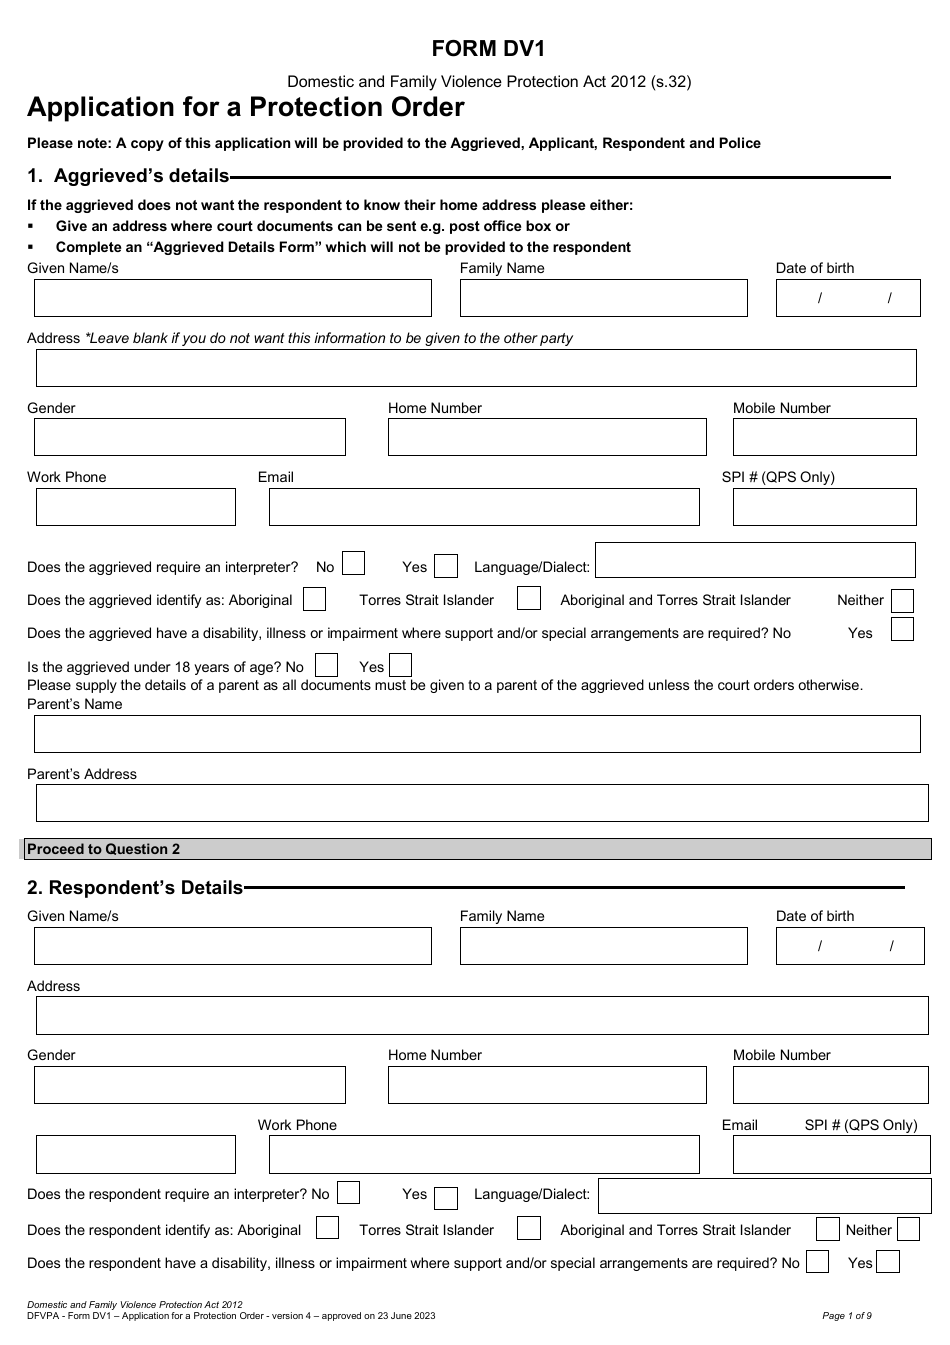 Form DV1 Application for a Protection Order - Queensland, Australia, Page 1